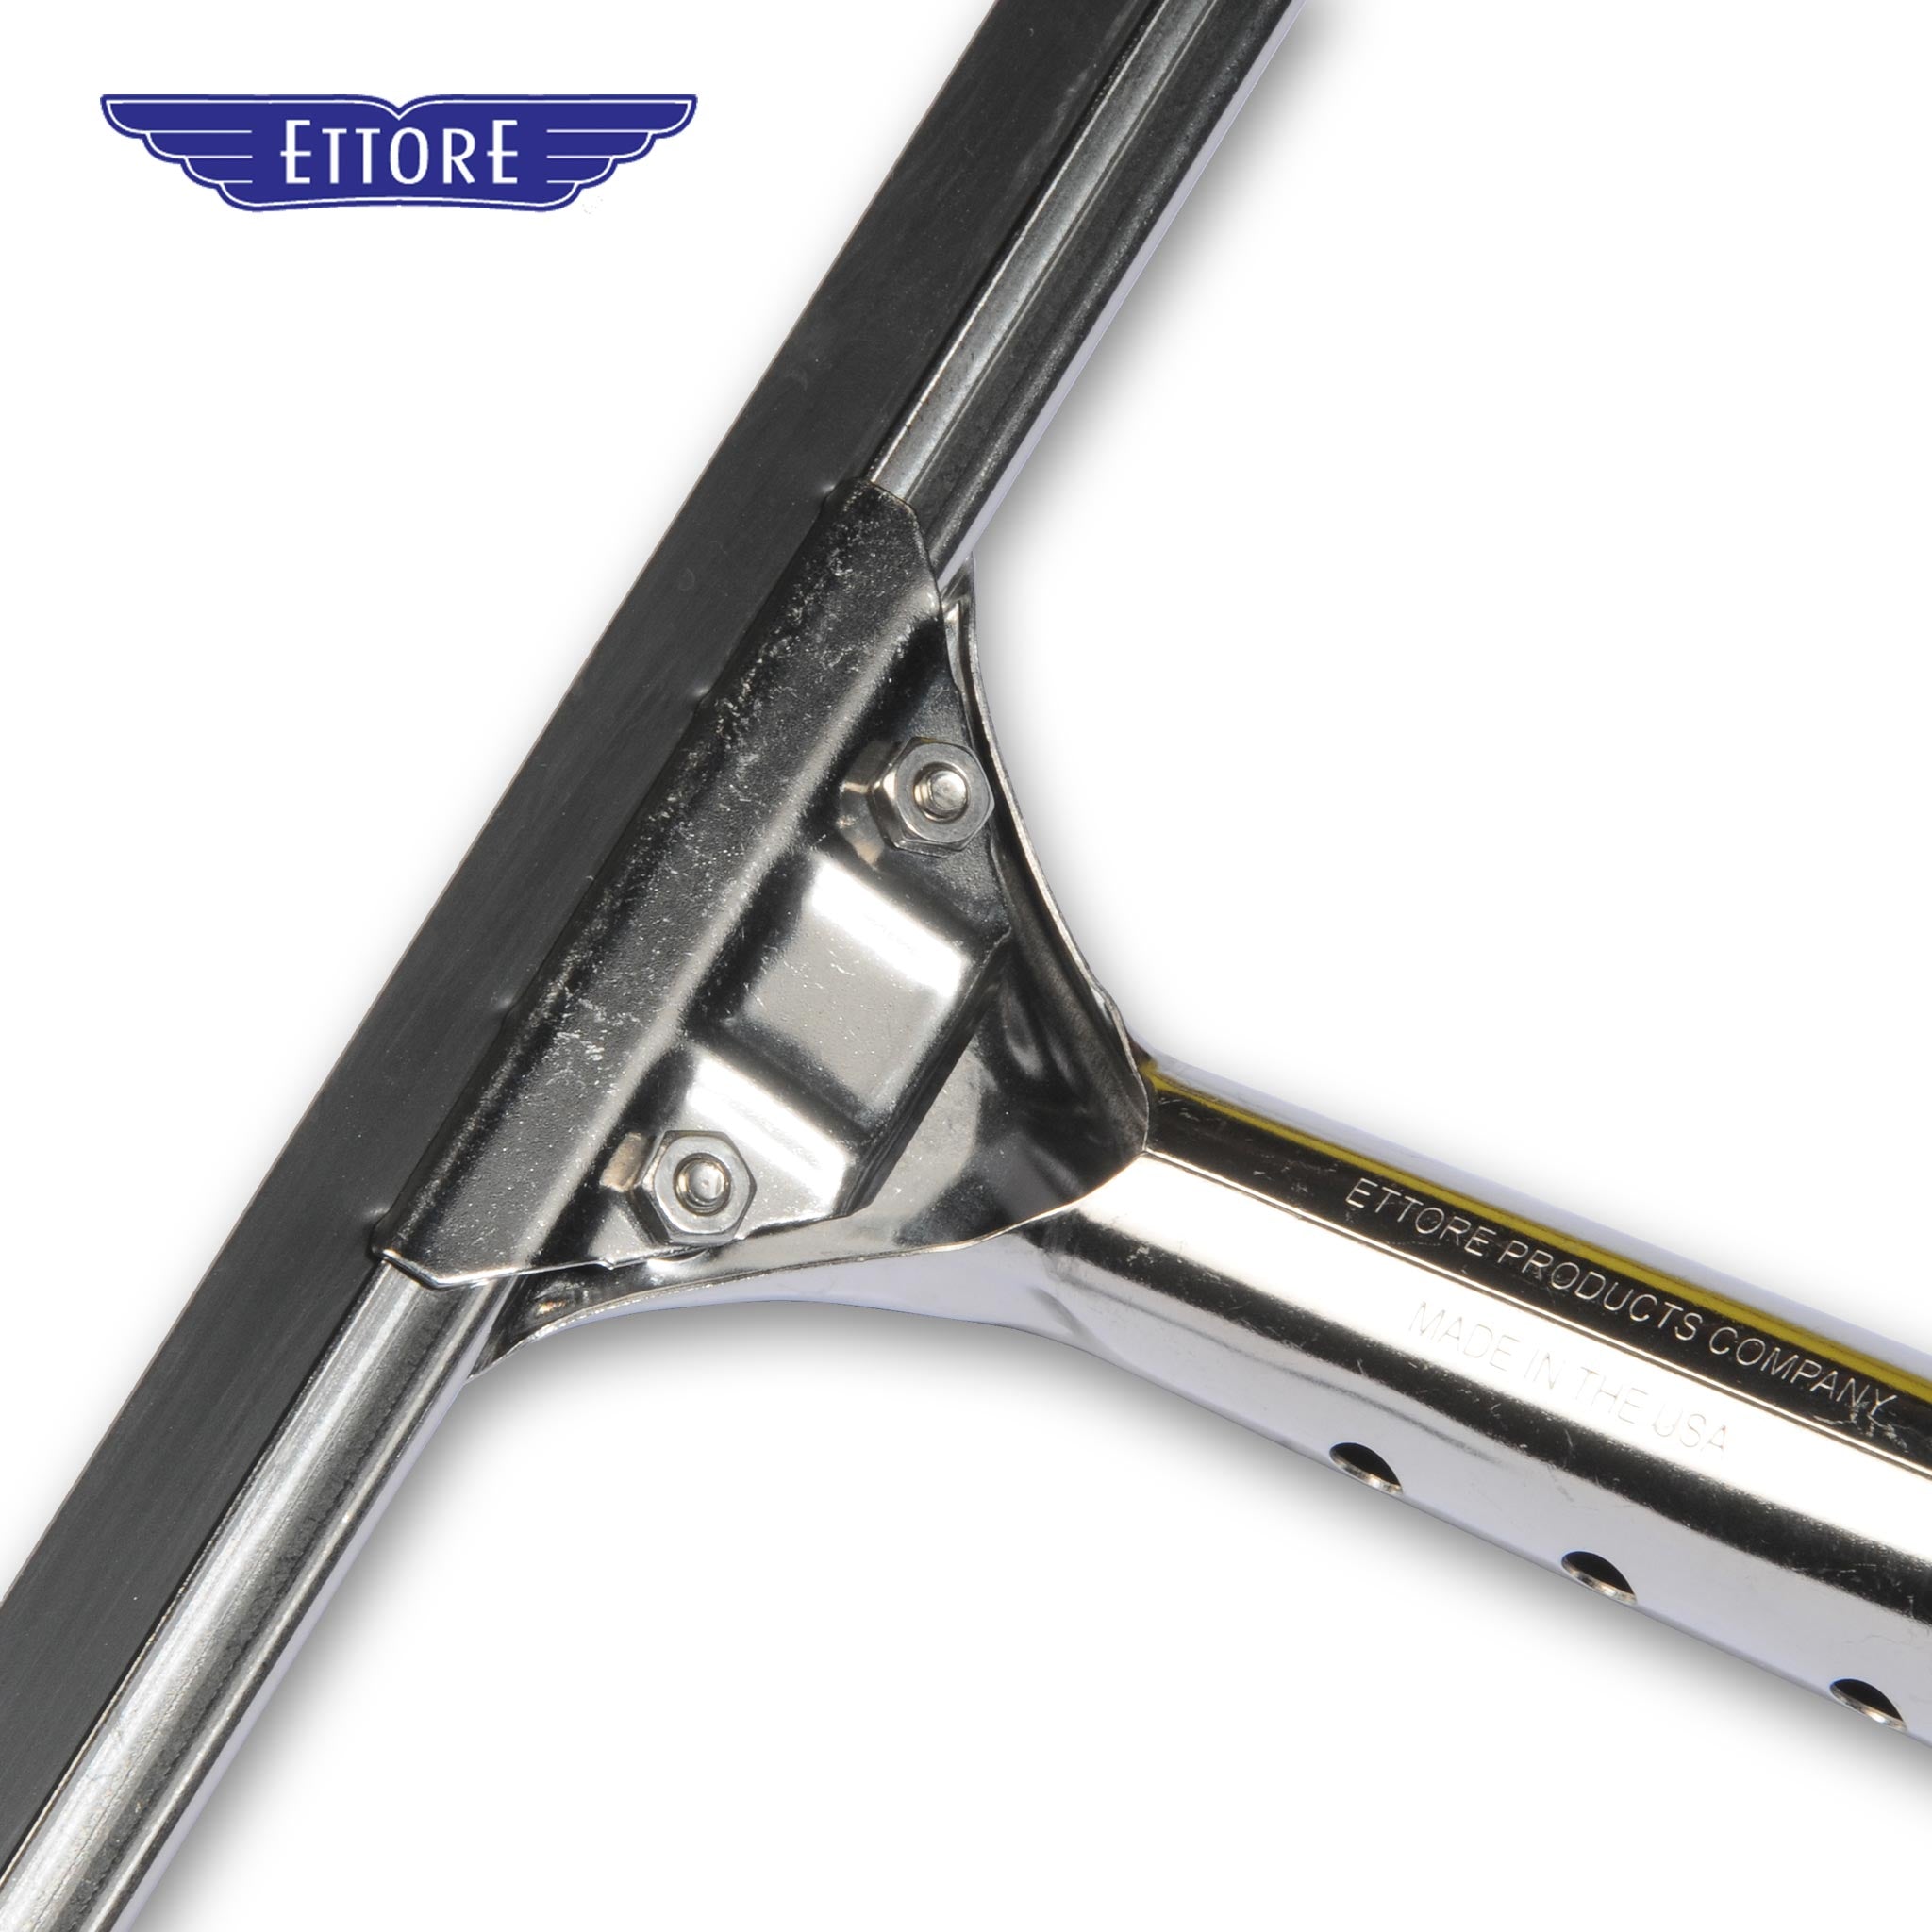 Ettore Master Stainless Steel Squeegee